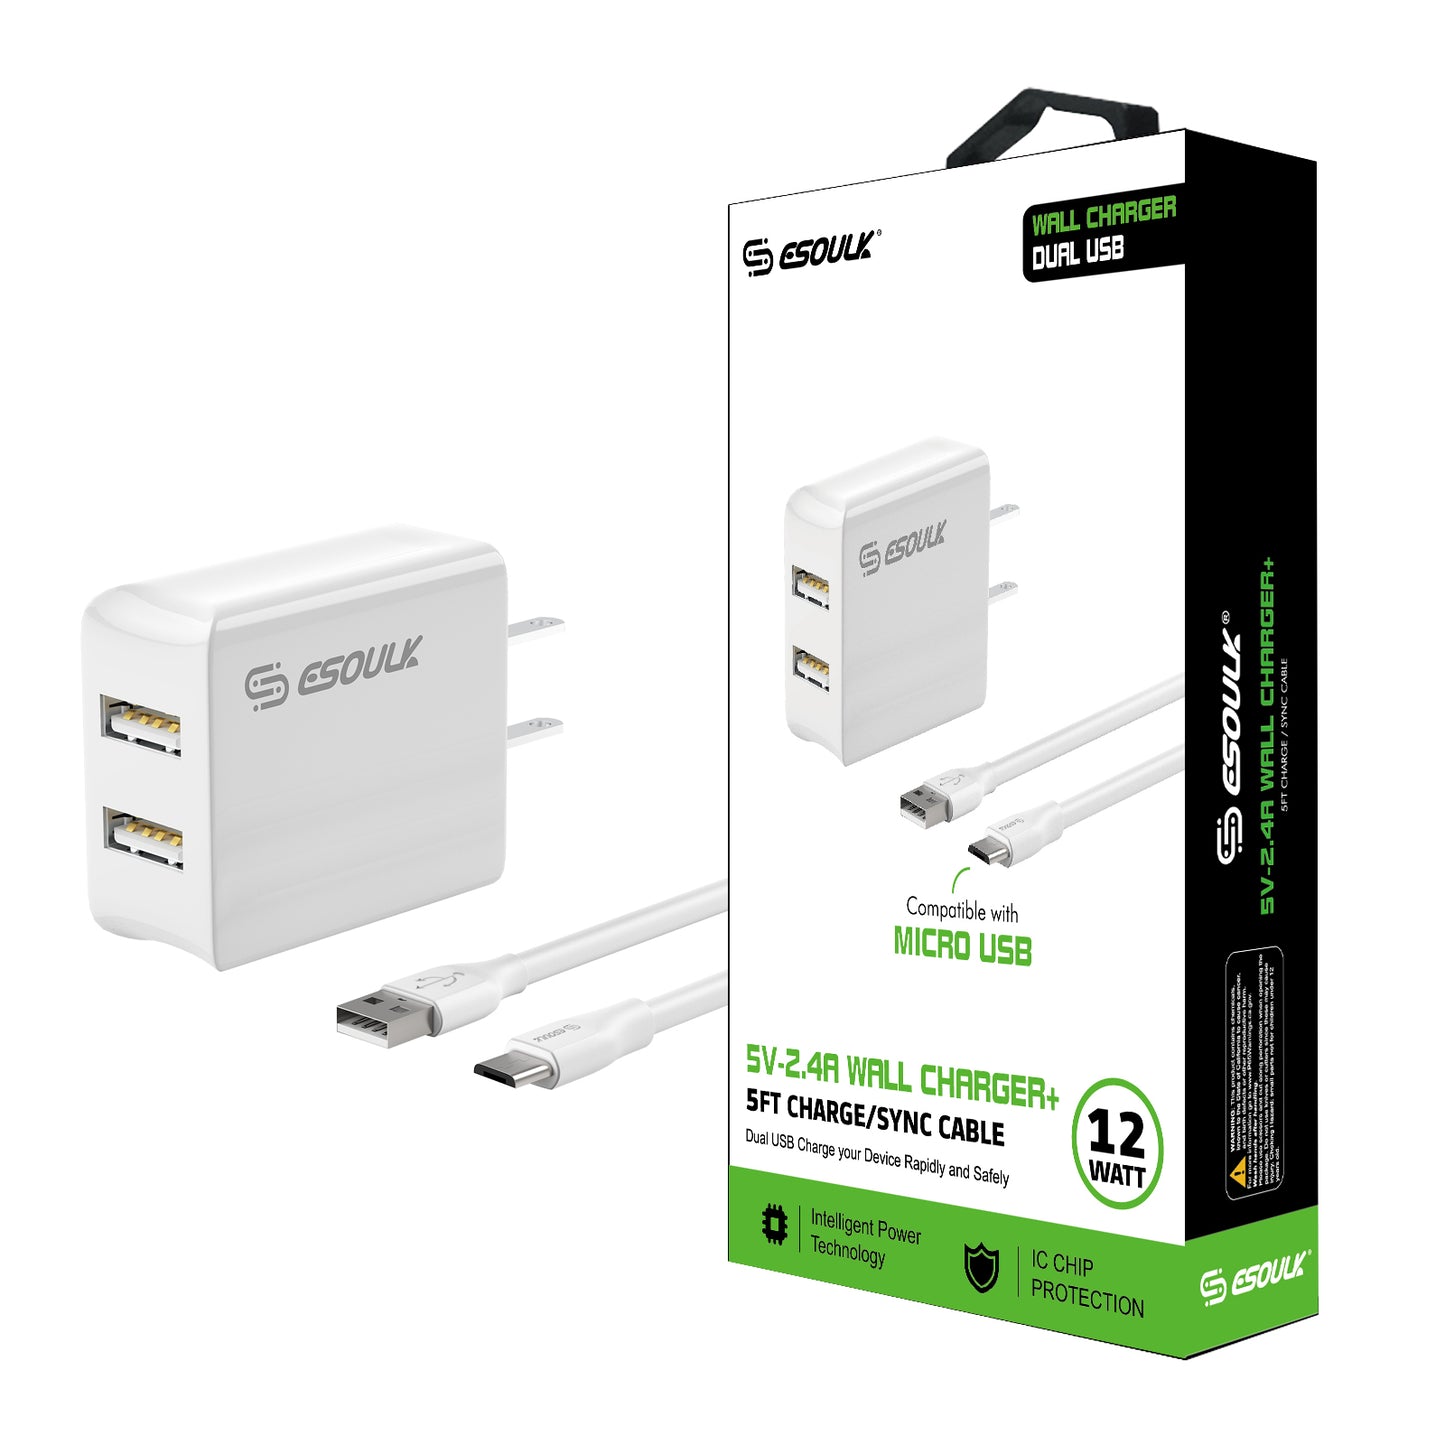 ESOULK 2.4A DUAL USB WALL CHARGER & 5FT MICRO CABLE